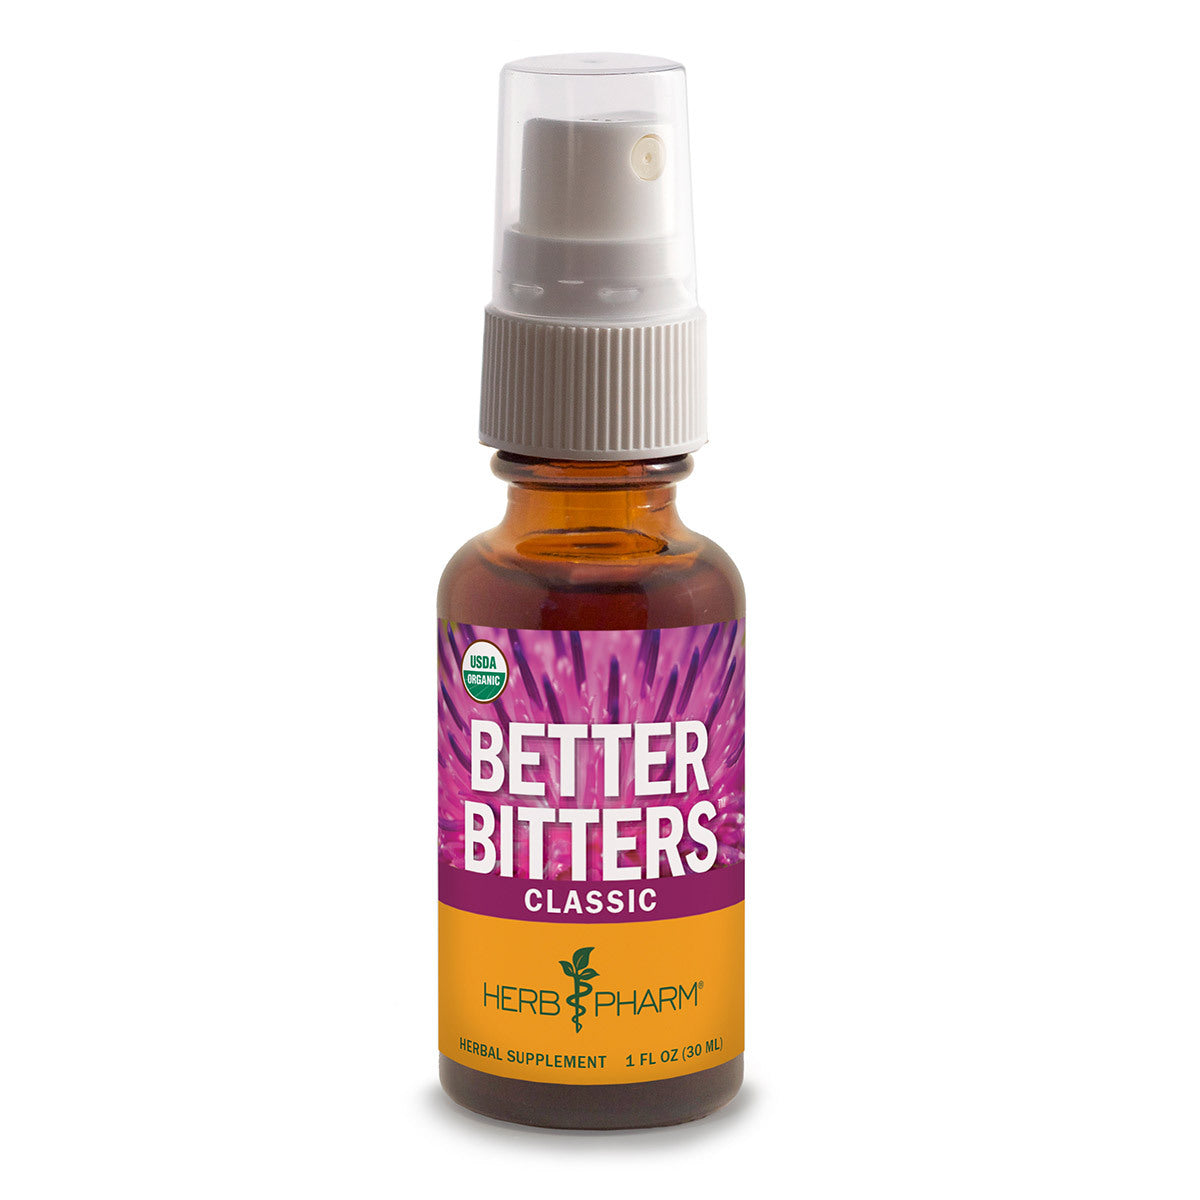 Primary image of Better Bitters - Classic